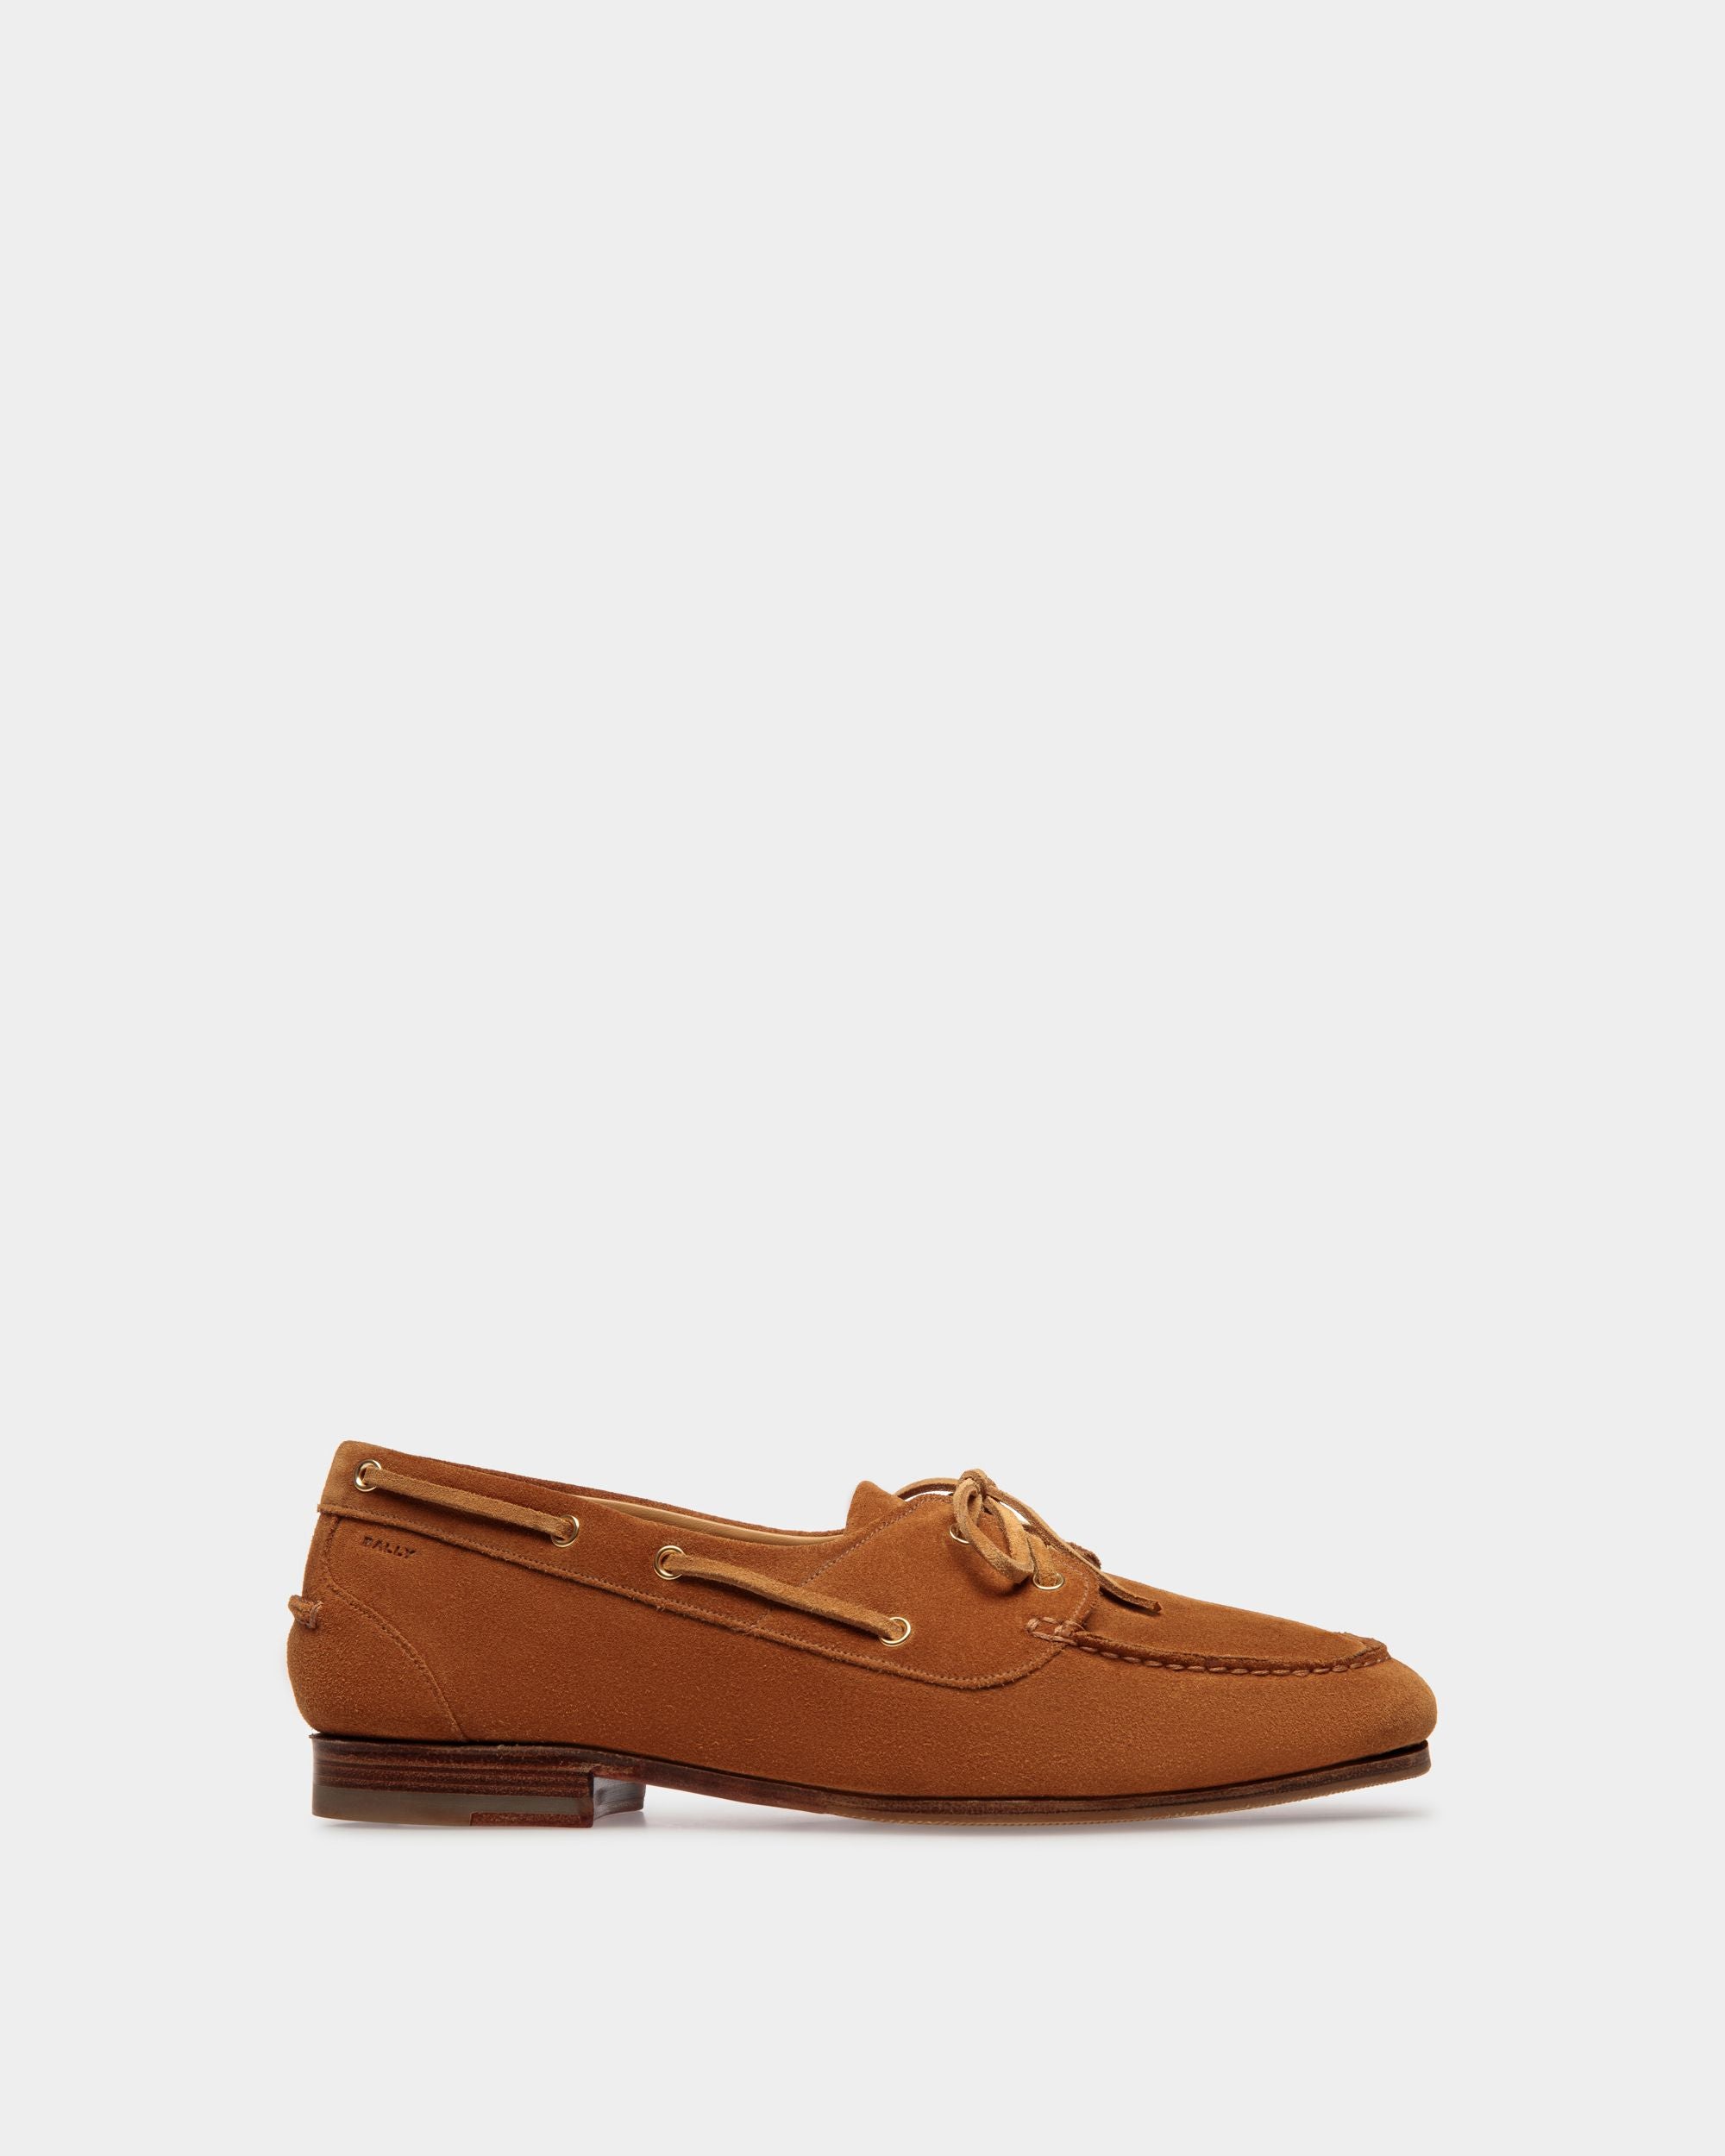 Plume | Men's Moccasin in Brown Suede| Bally | Still Life Side